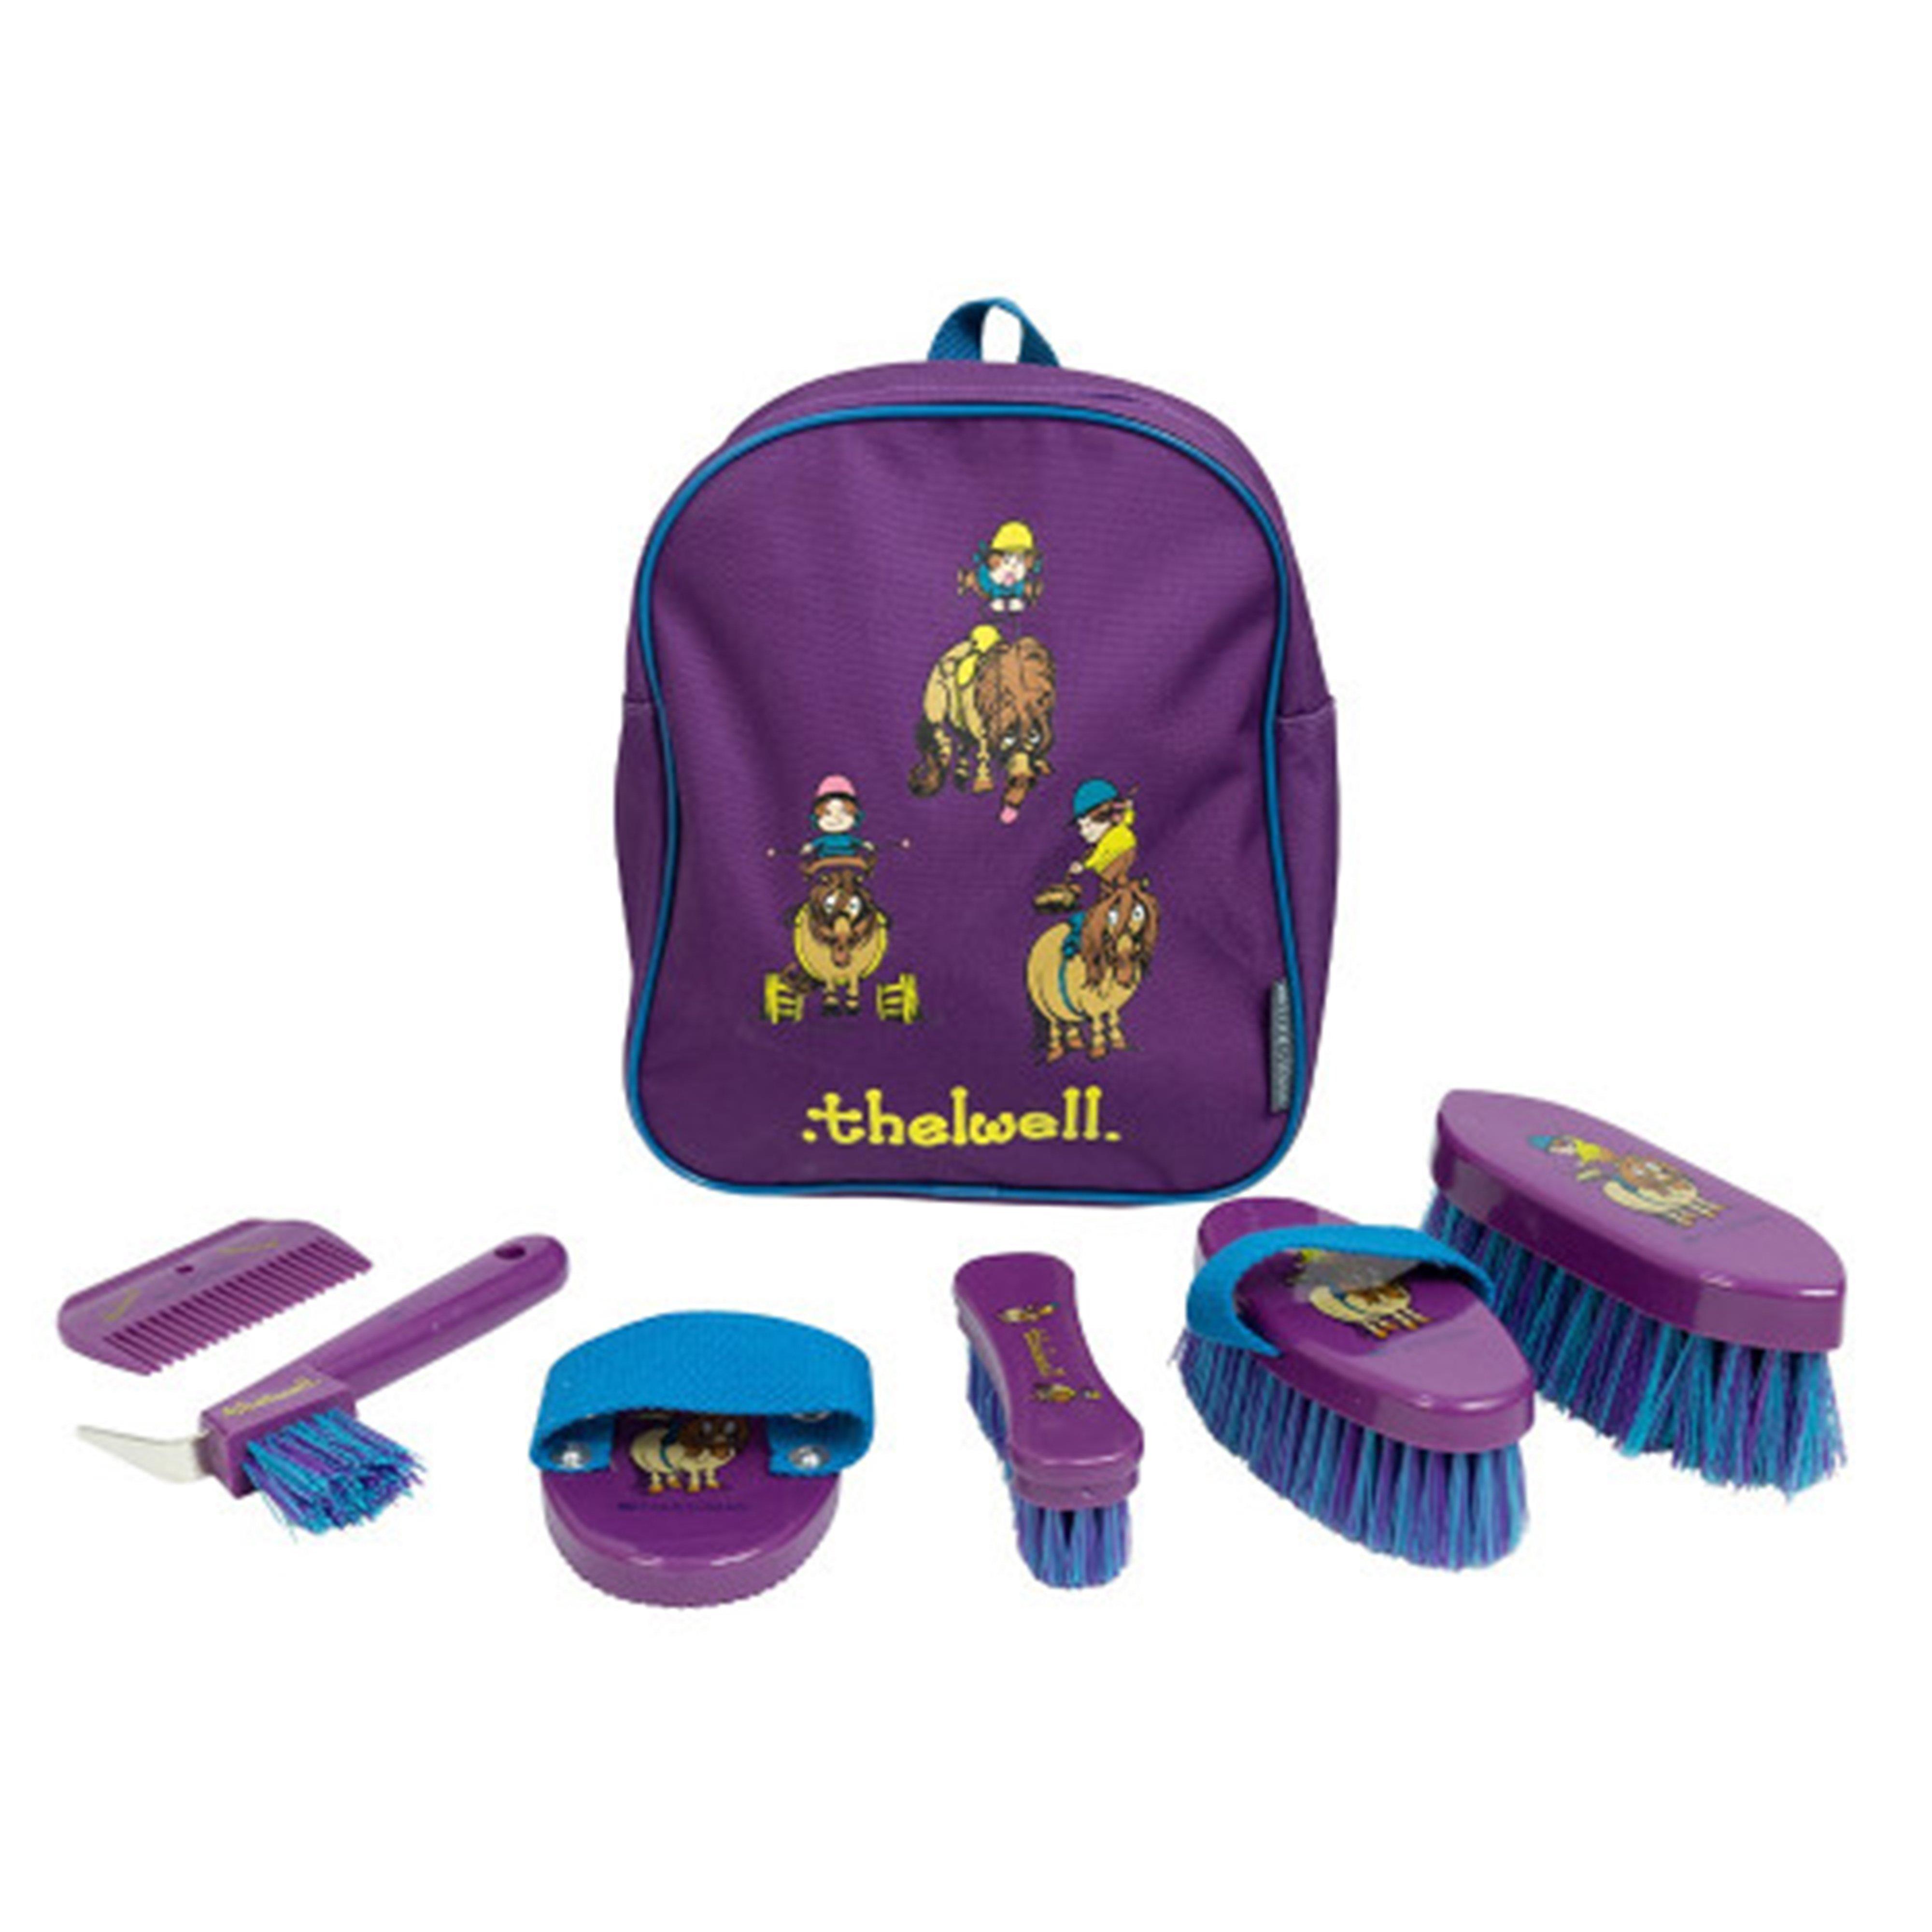 Thelwell Collection Pony Friends Complete Grooming Kit Rucksack Purple Blue